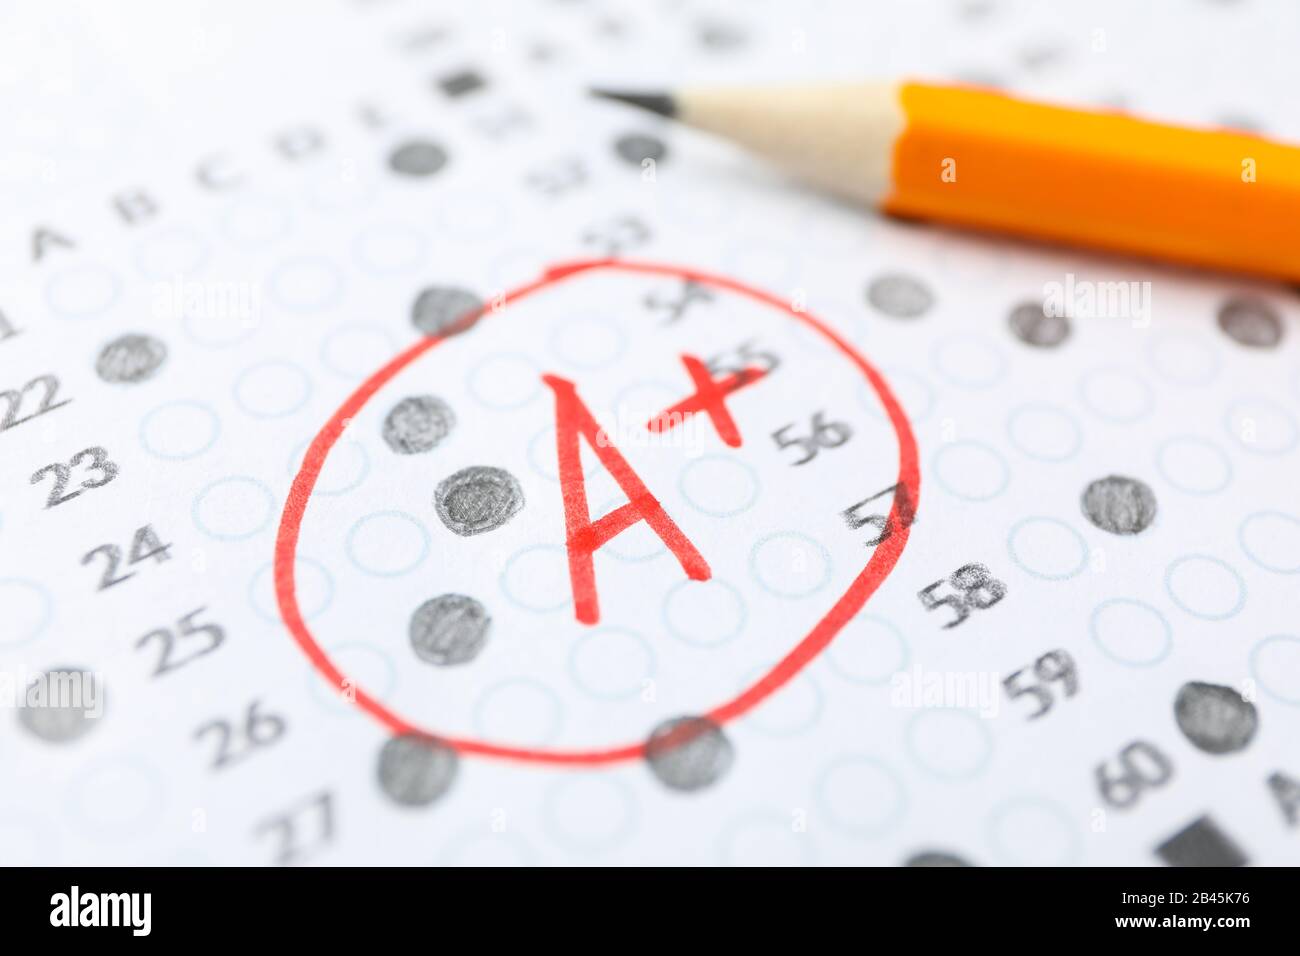 Test score sheet with answers, grade A+ and pencil, close up Stock Photo